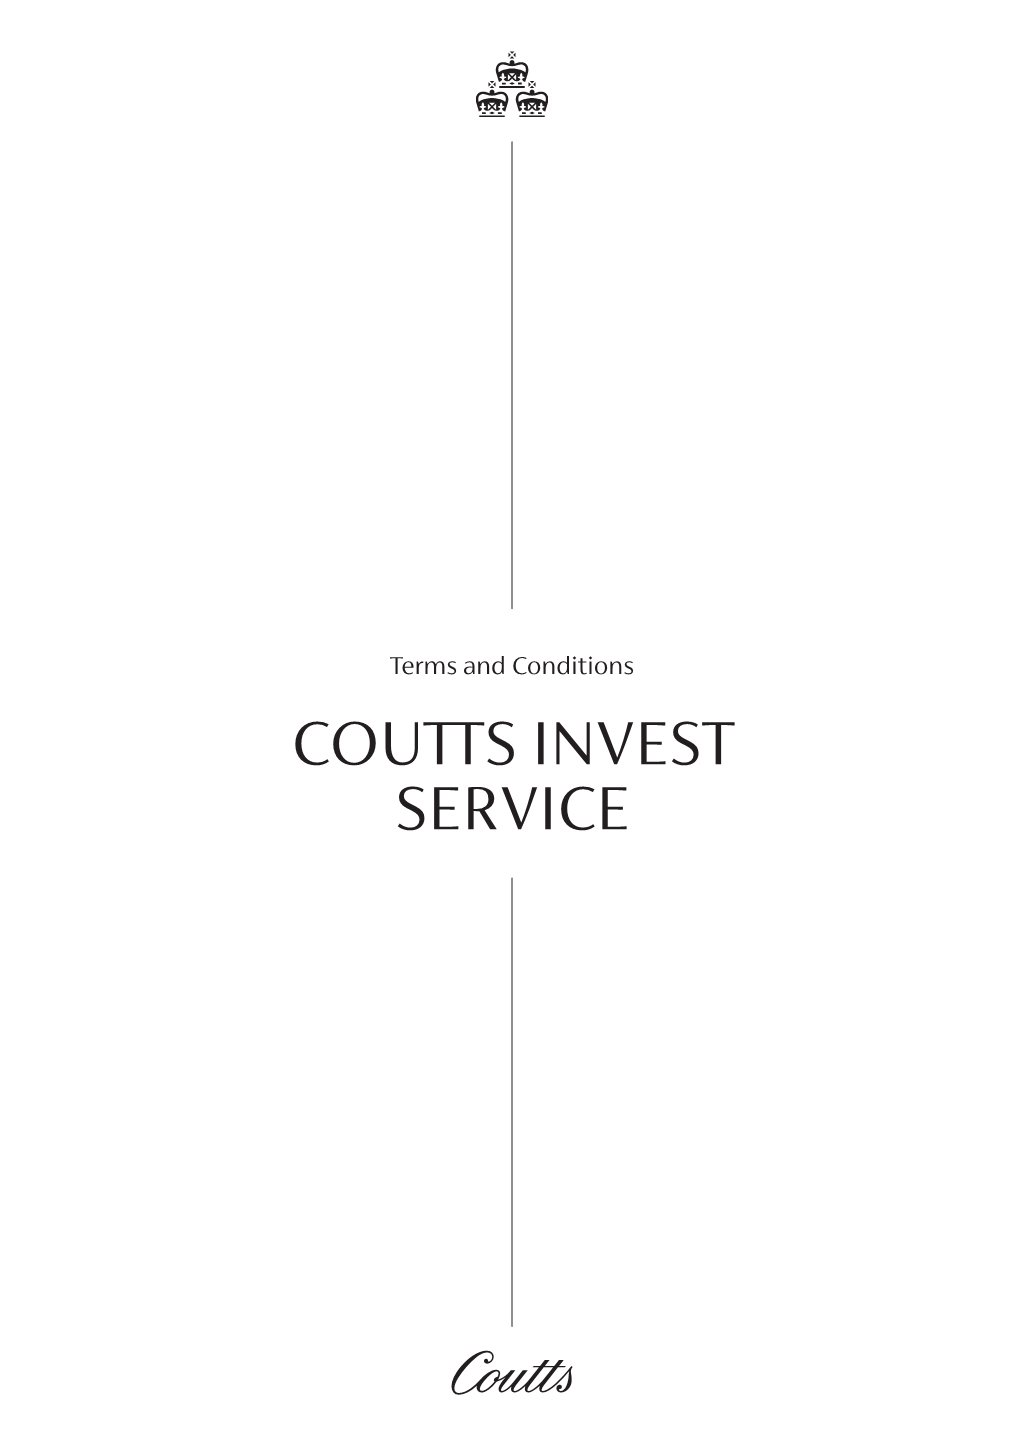 Coutts Invest Service